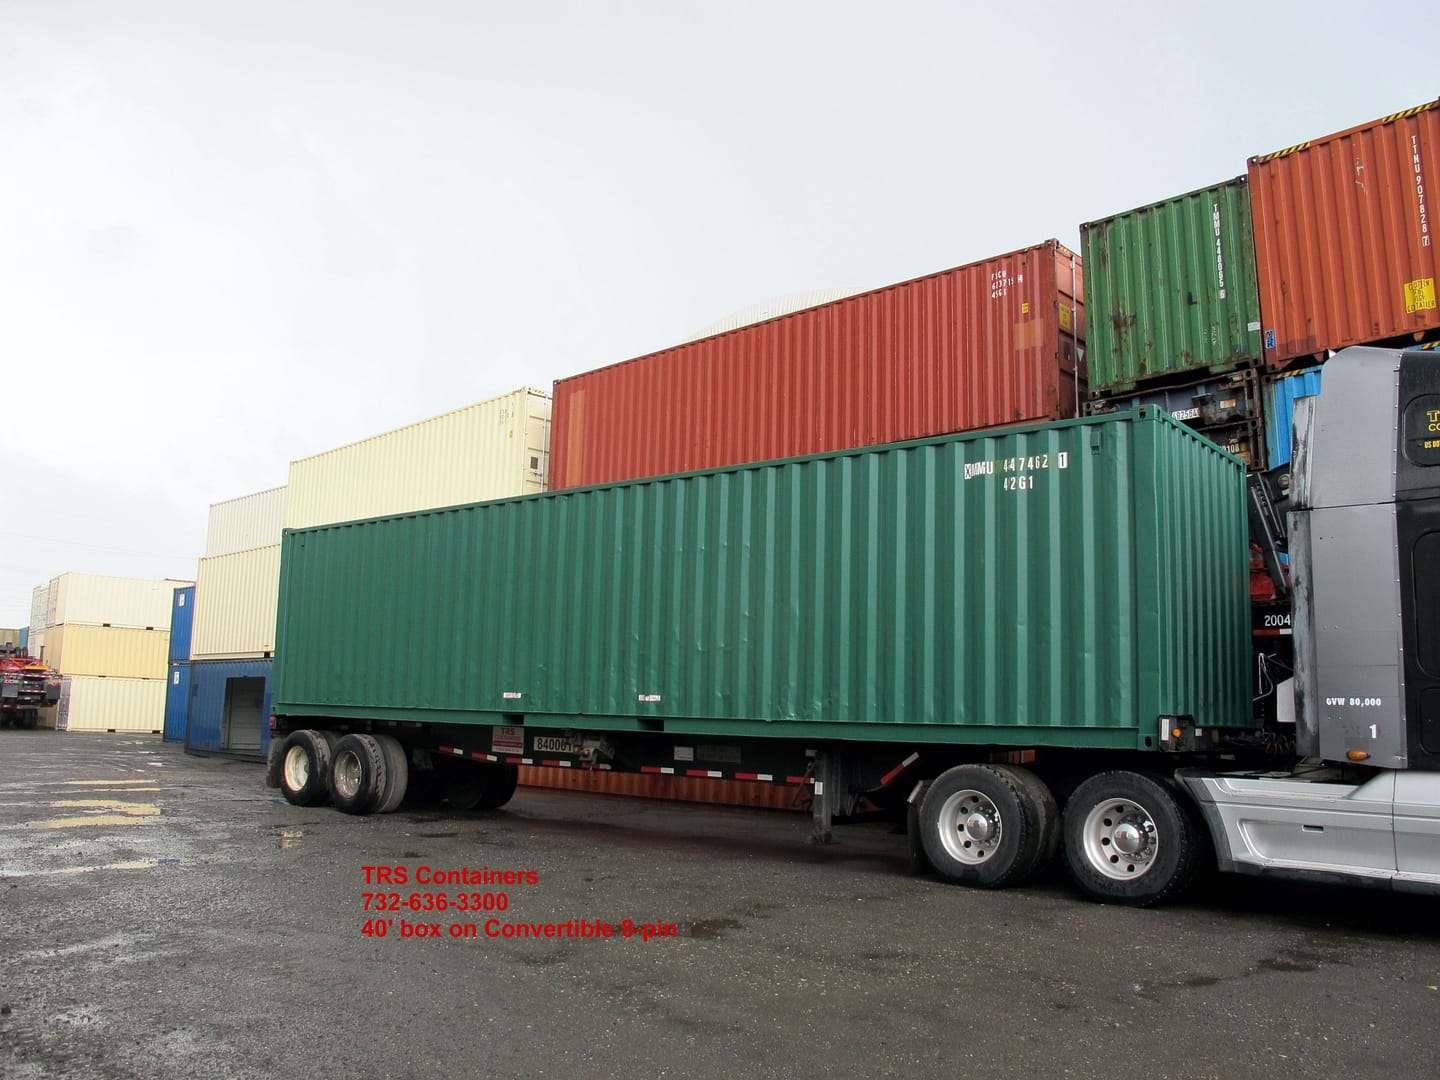 TRS Containers sells and rents container chassis setups b